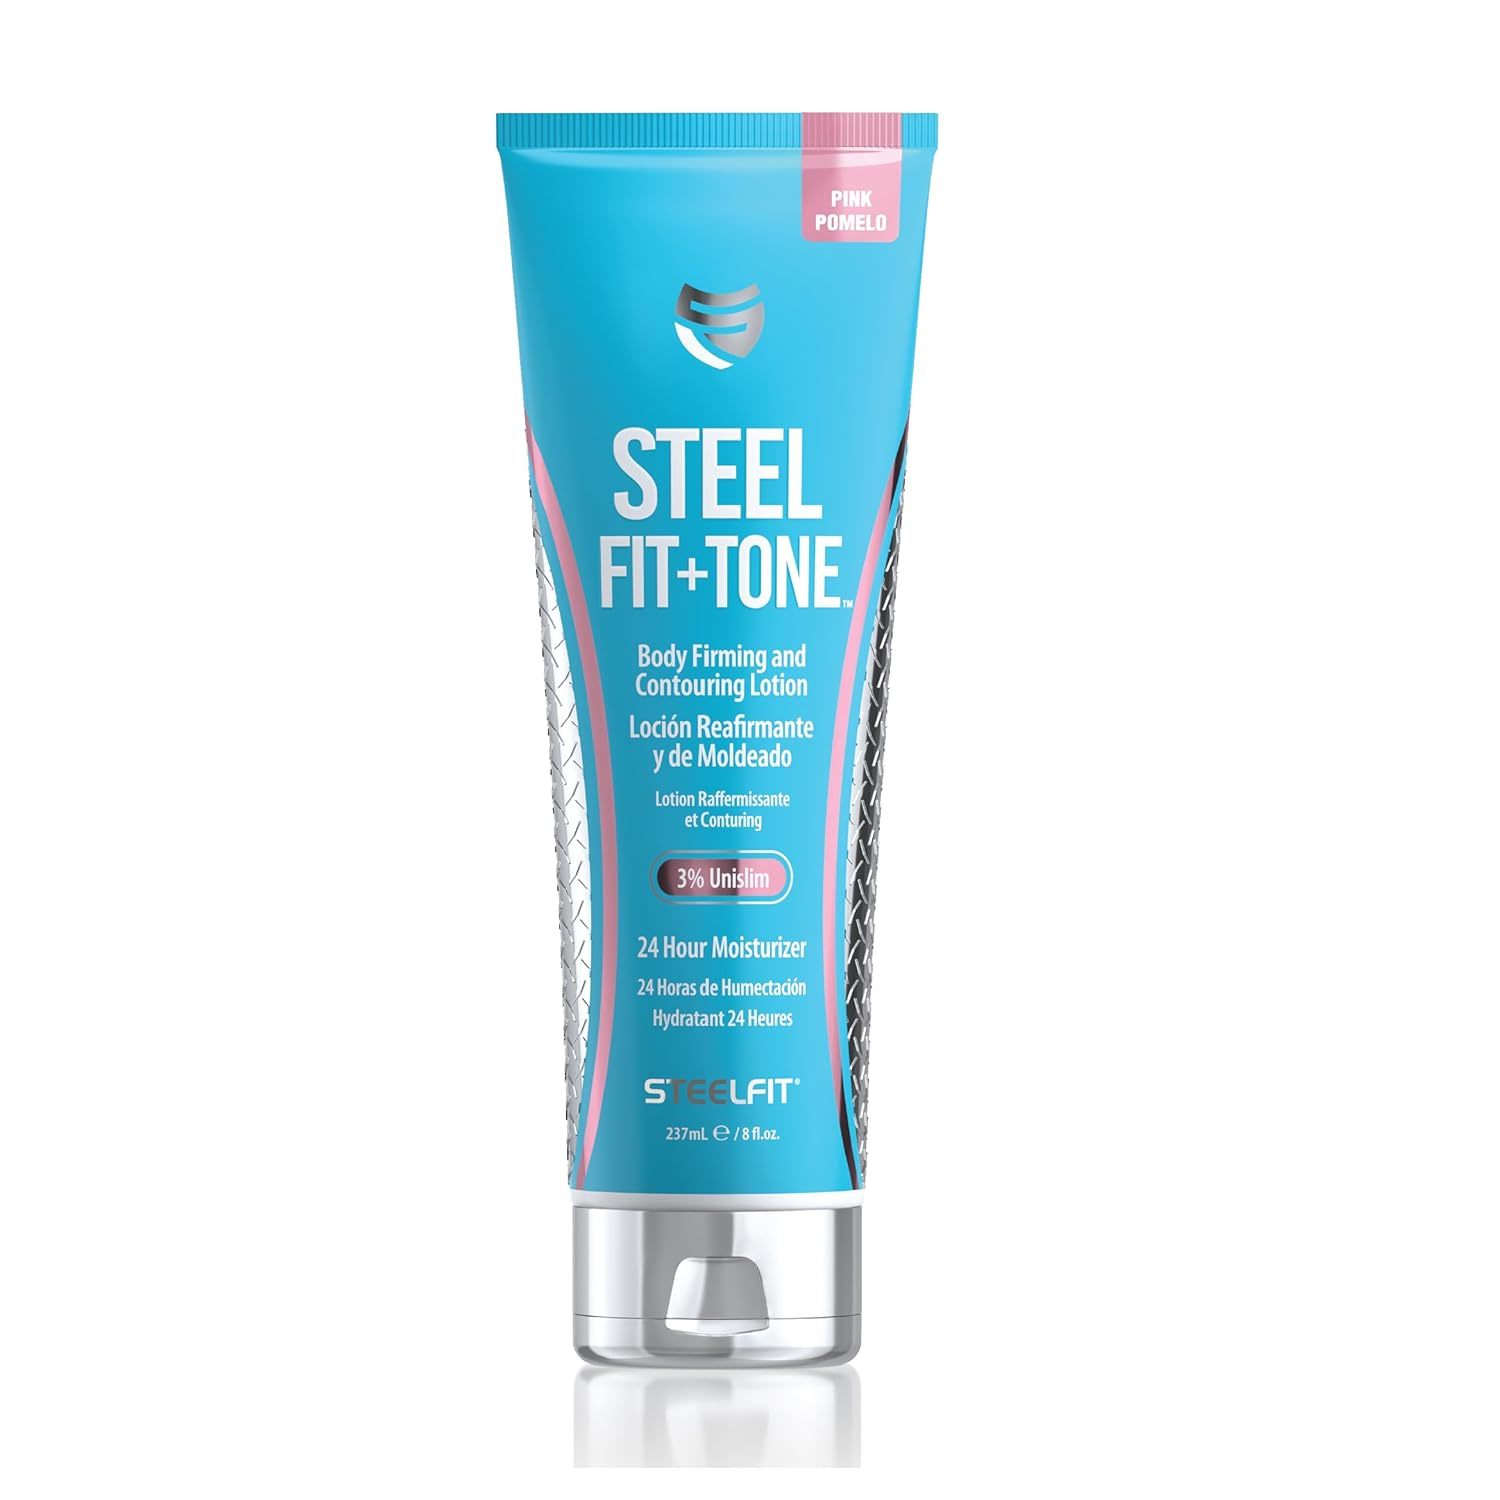 SteelFit Steel Fit + Tone - Contouring & Firming Body Lotion - 8 fl oz - Pink Po - $26.99